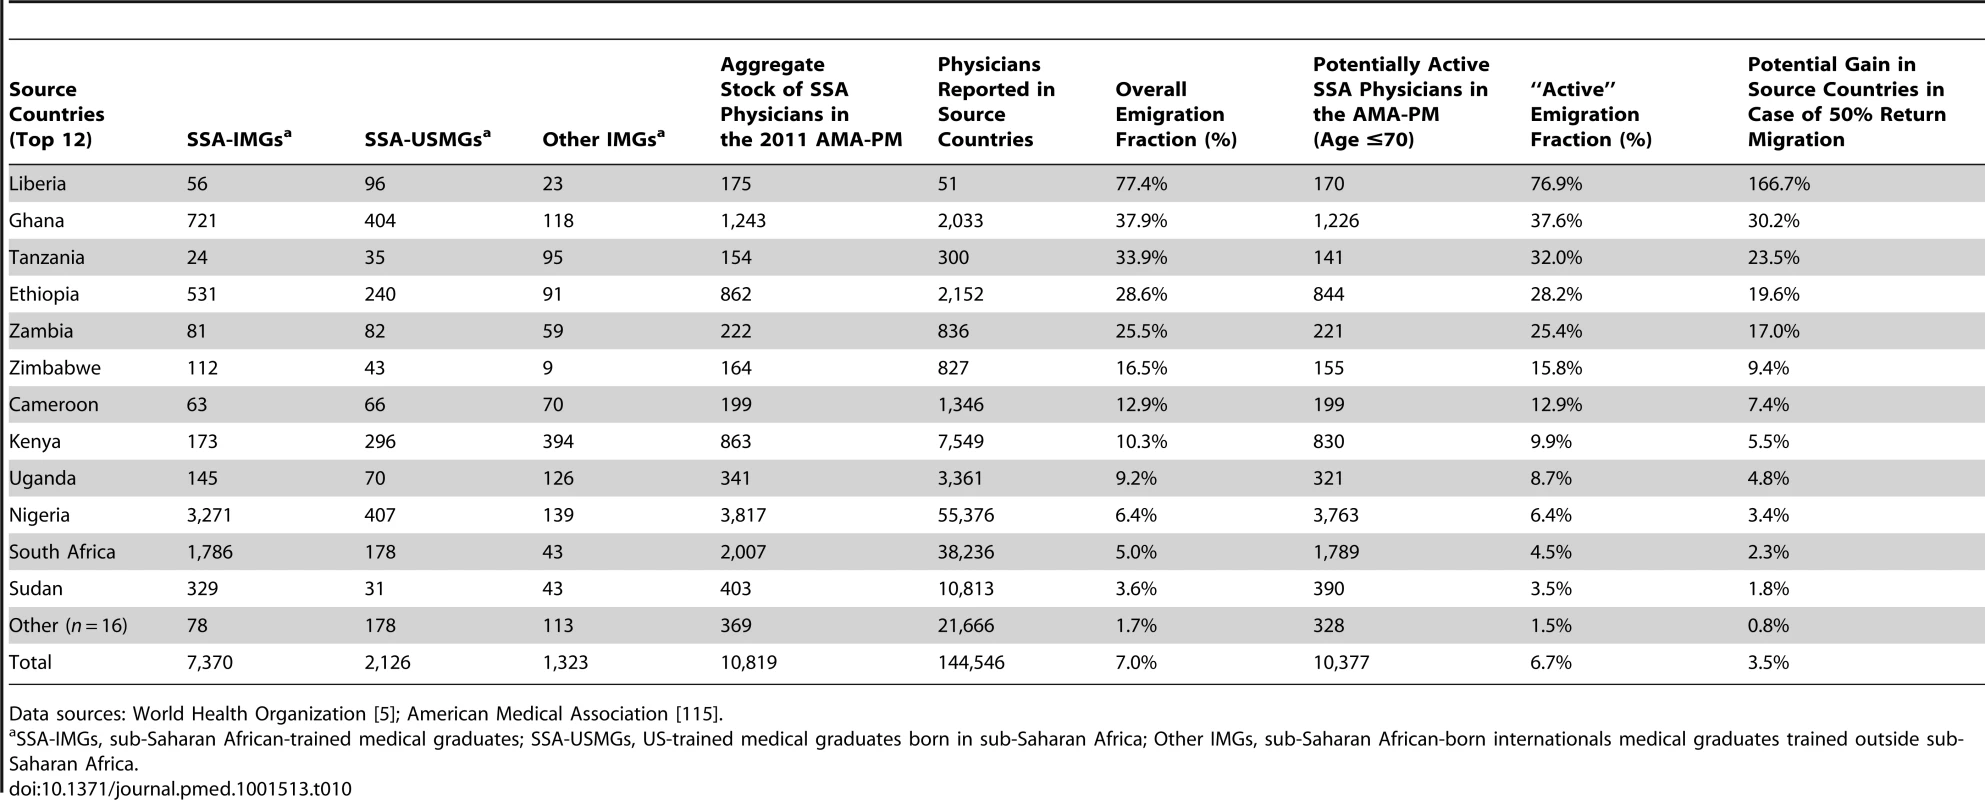 Aggregate stock and overall emigration fraction of Sub-Saharan African physicians in the US physician workforce in 2011.